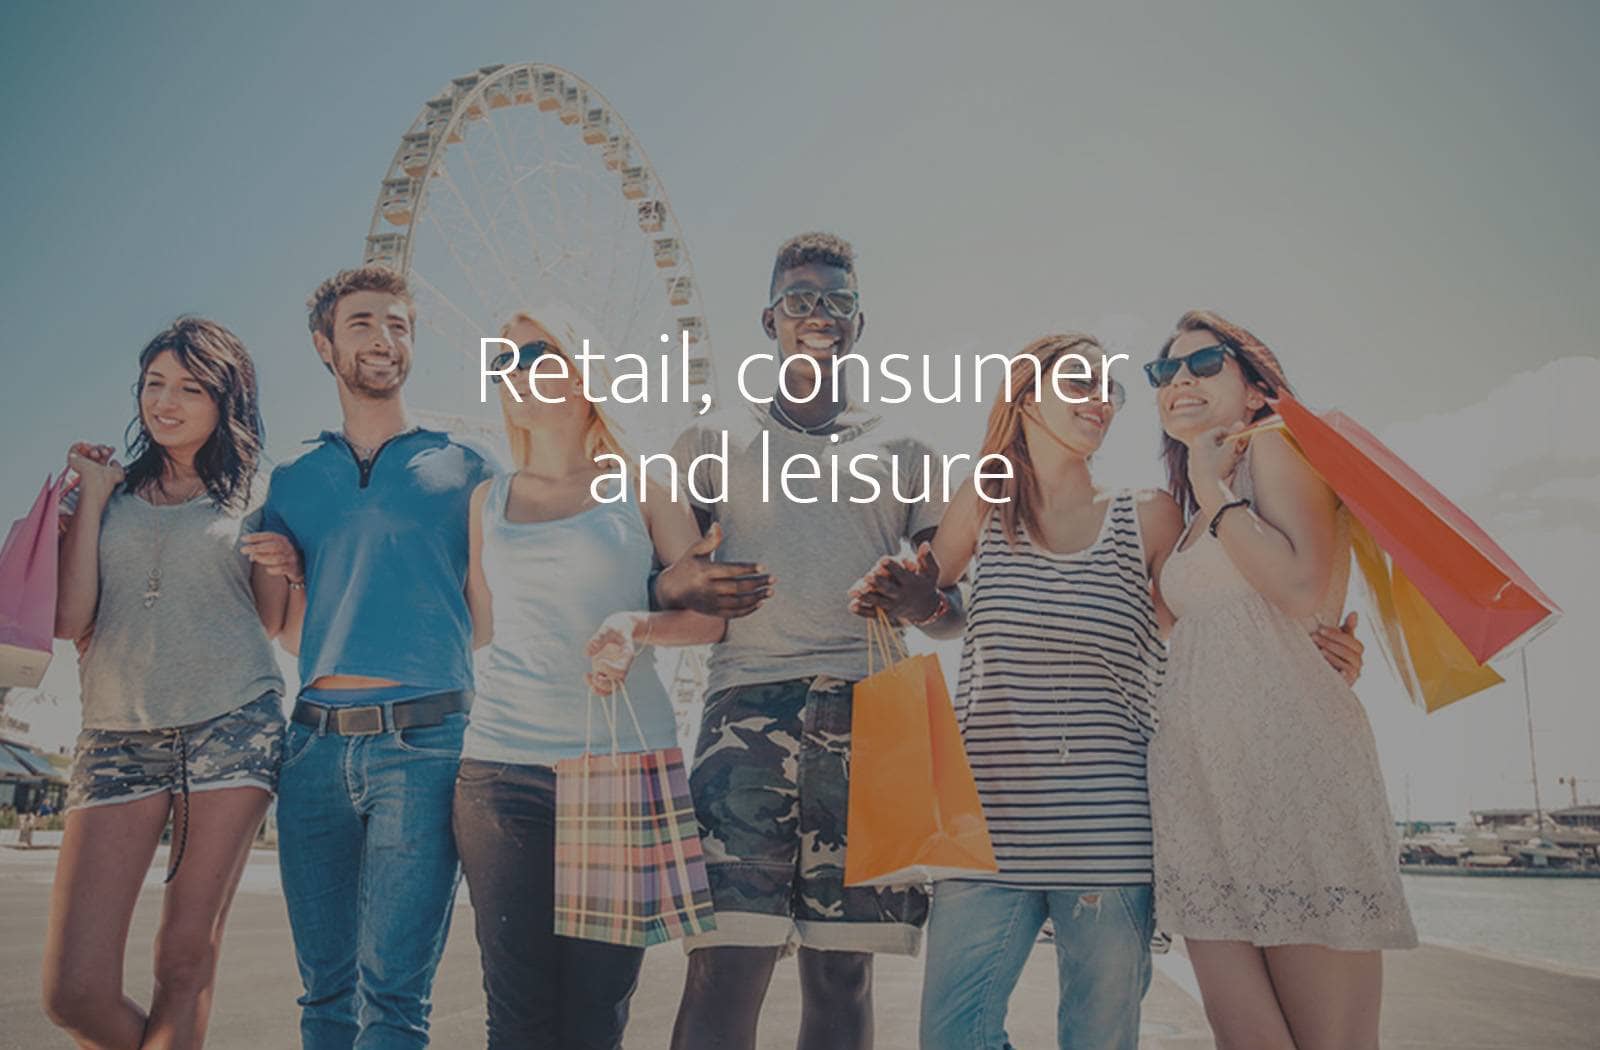 Recruitment, assessment & development for retail, consumer and leisure sectors